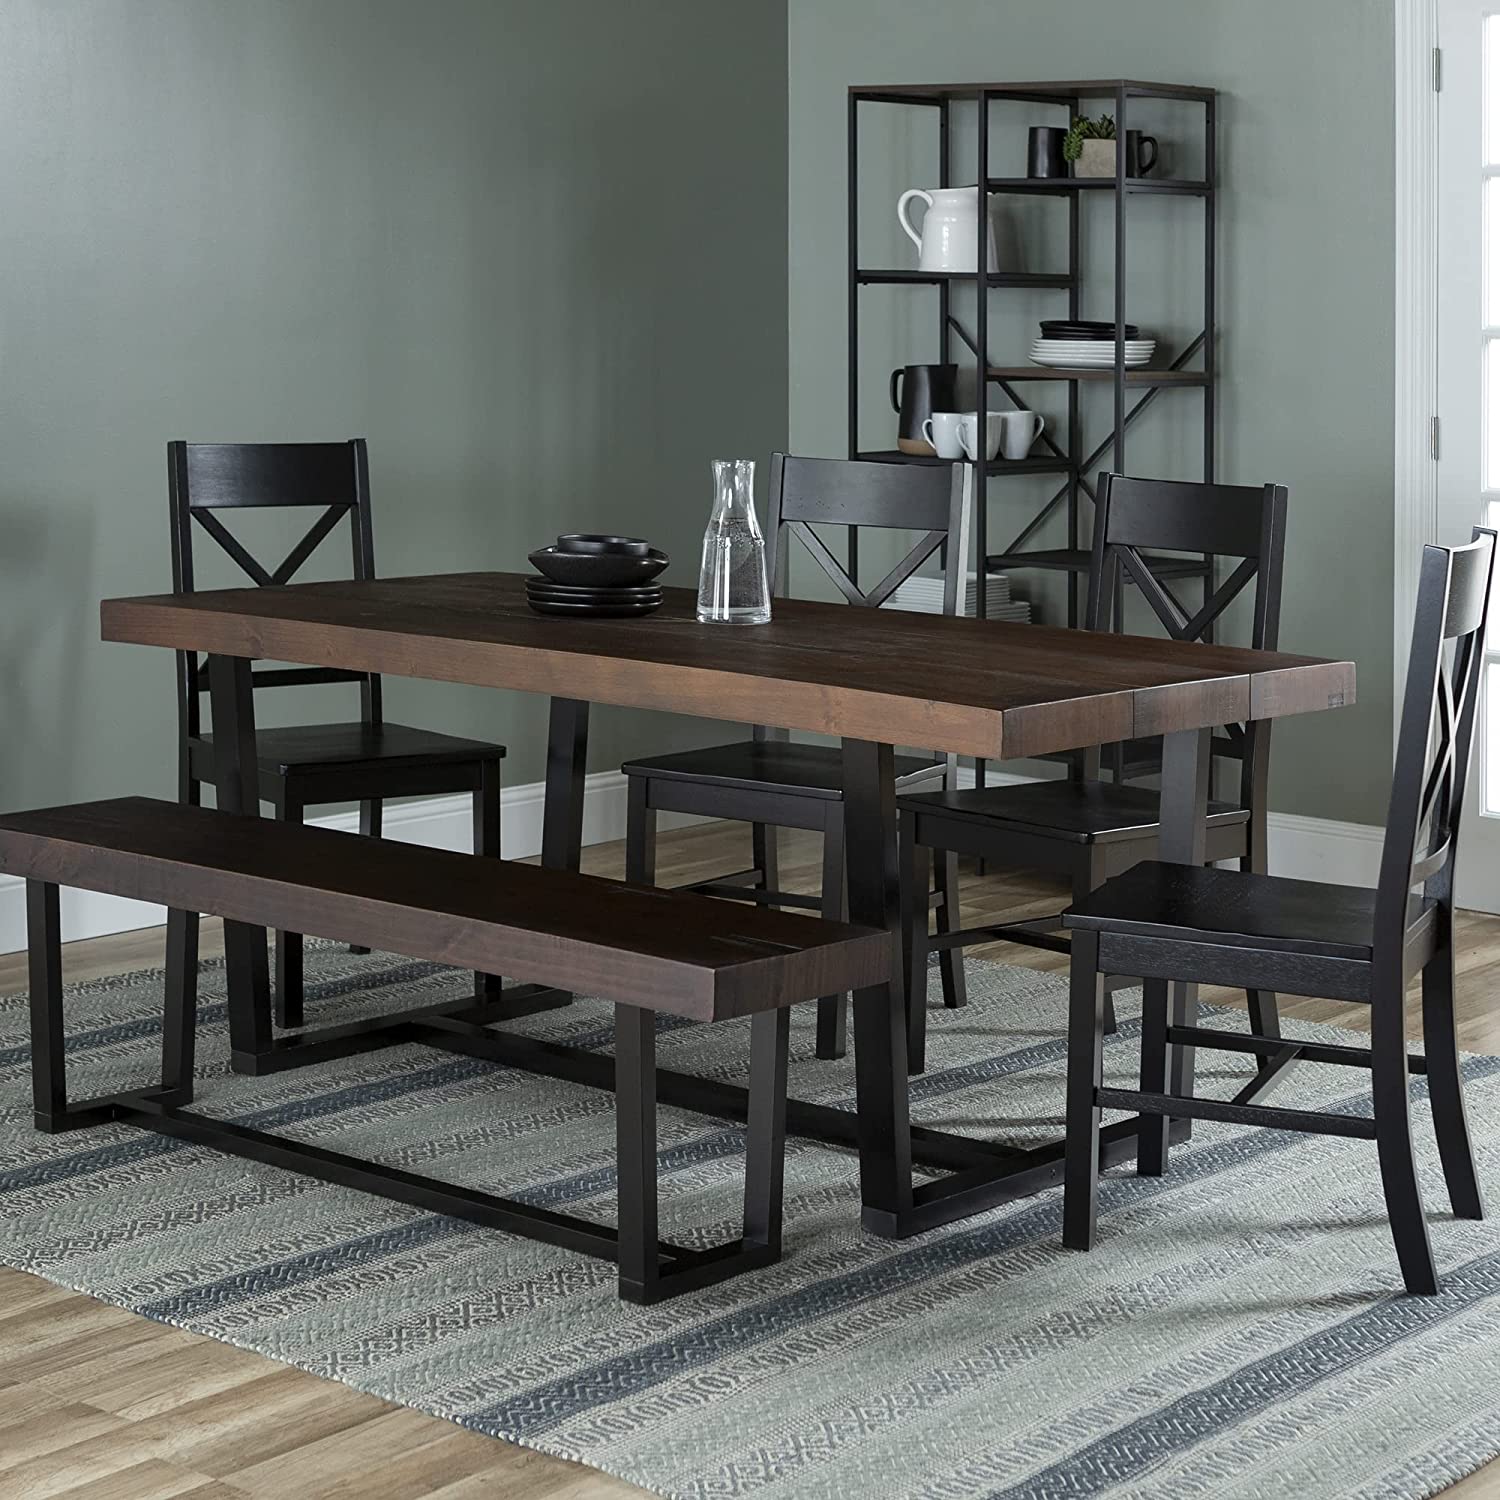 Walker Edison Furniture Company 6-Piece Dining Set with Bench